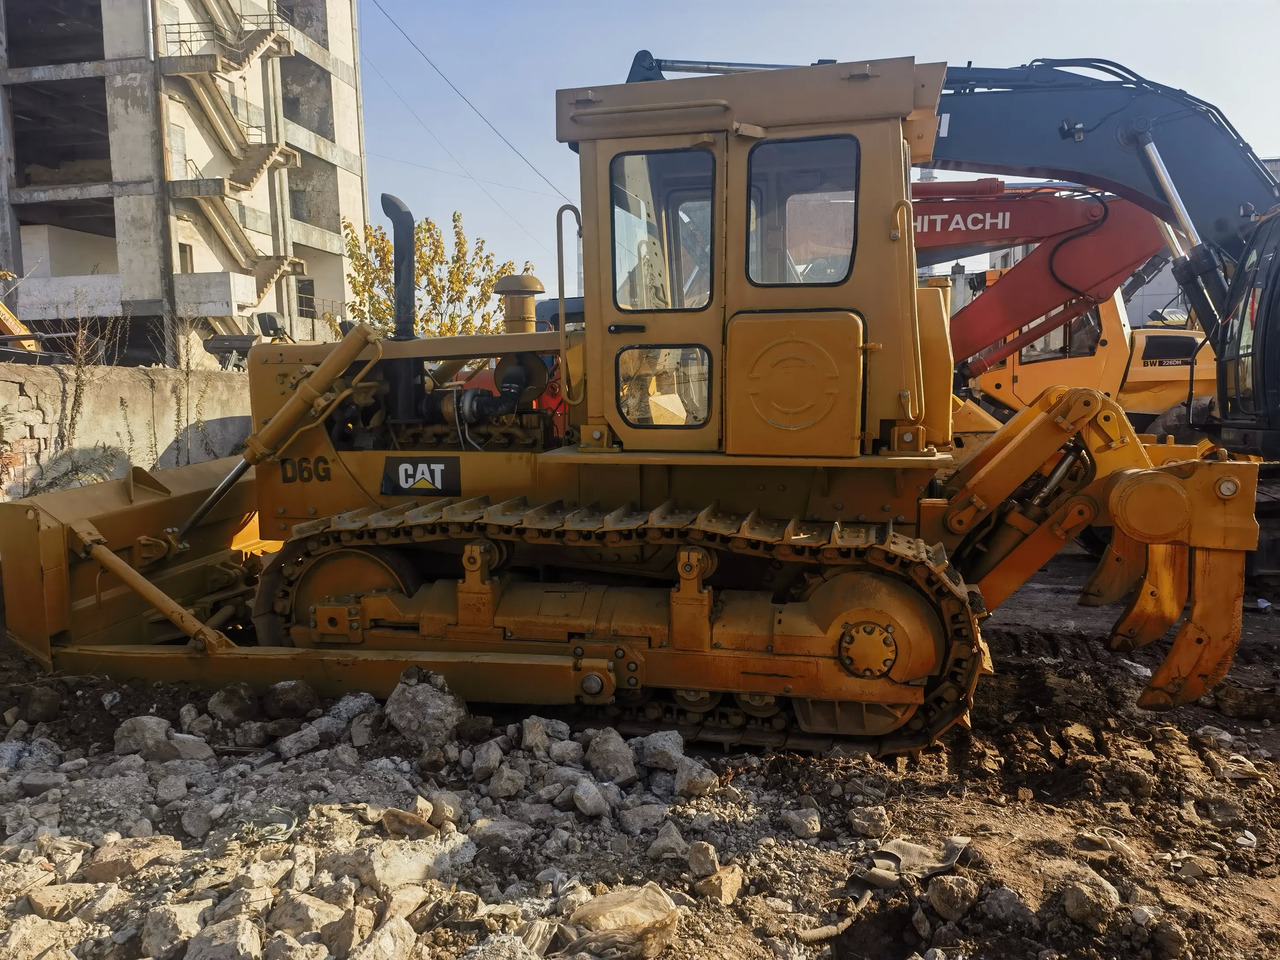 Japan made bulldozer caterpillar D6G D6M D7H D7R D5K used Bulldozer with winch for sale - Bulldozer: picture 4